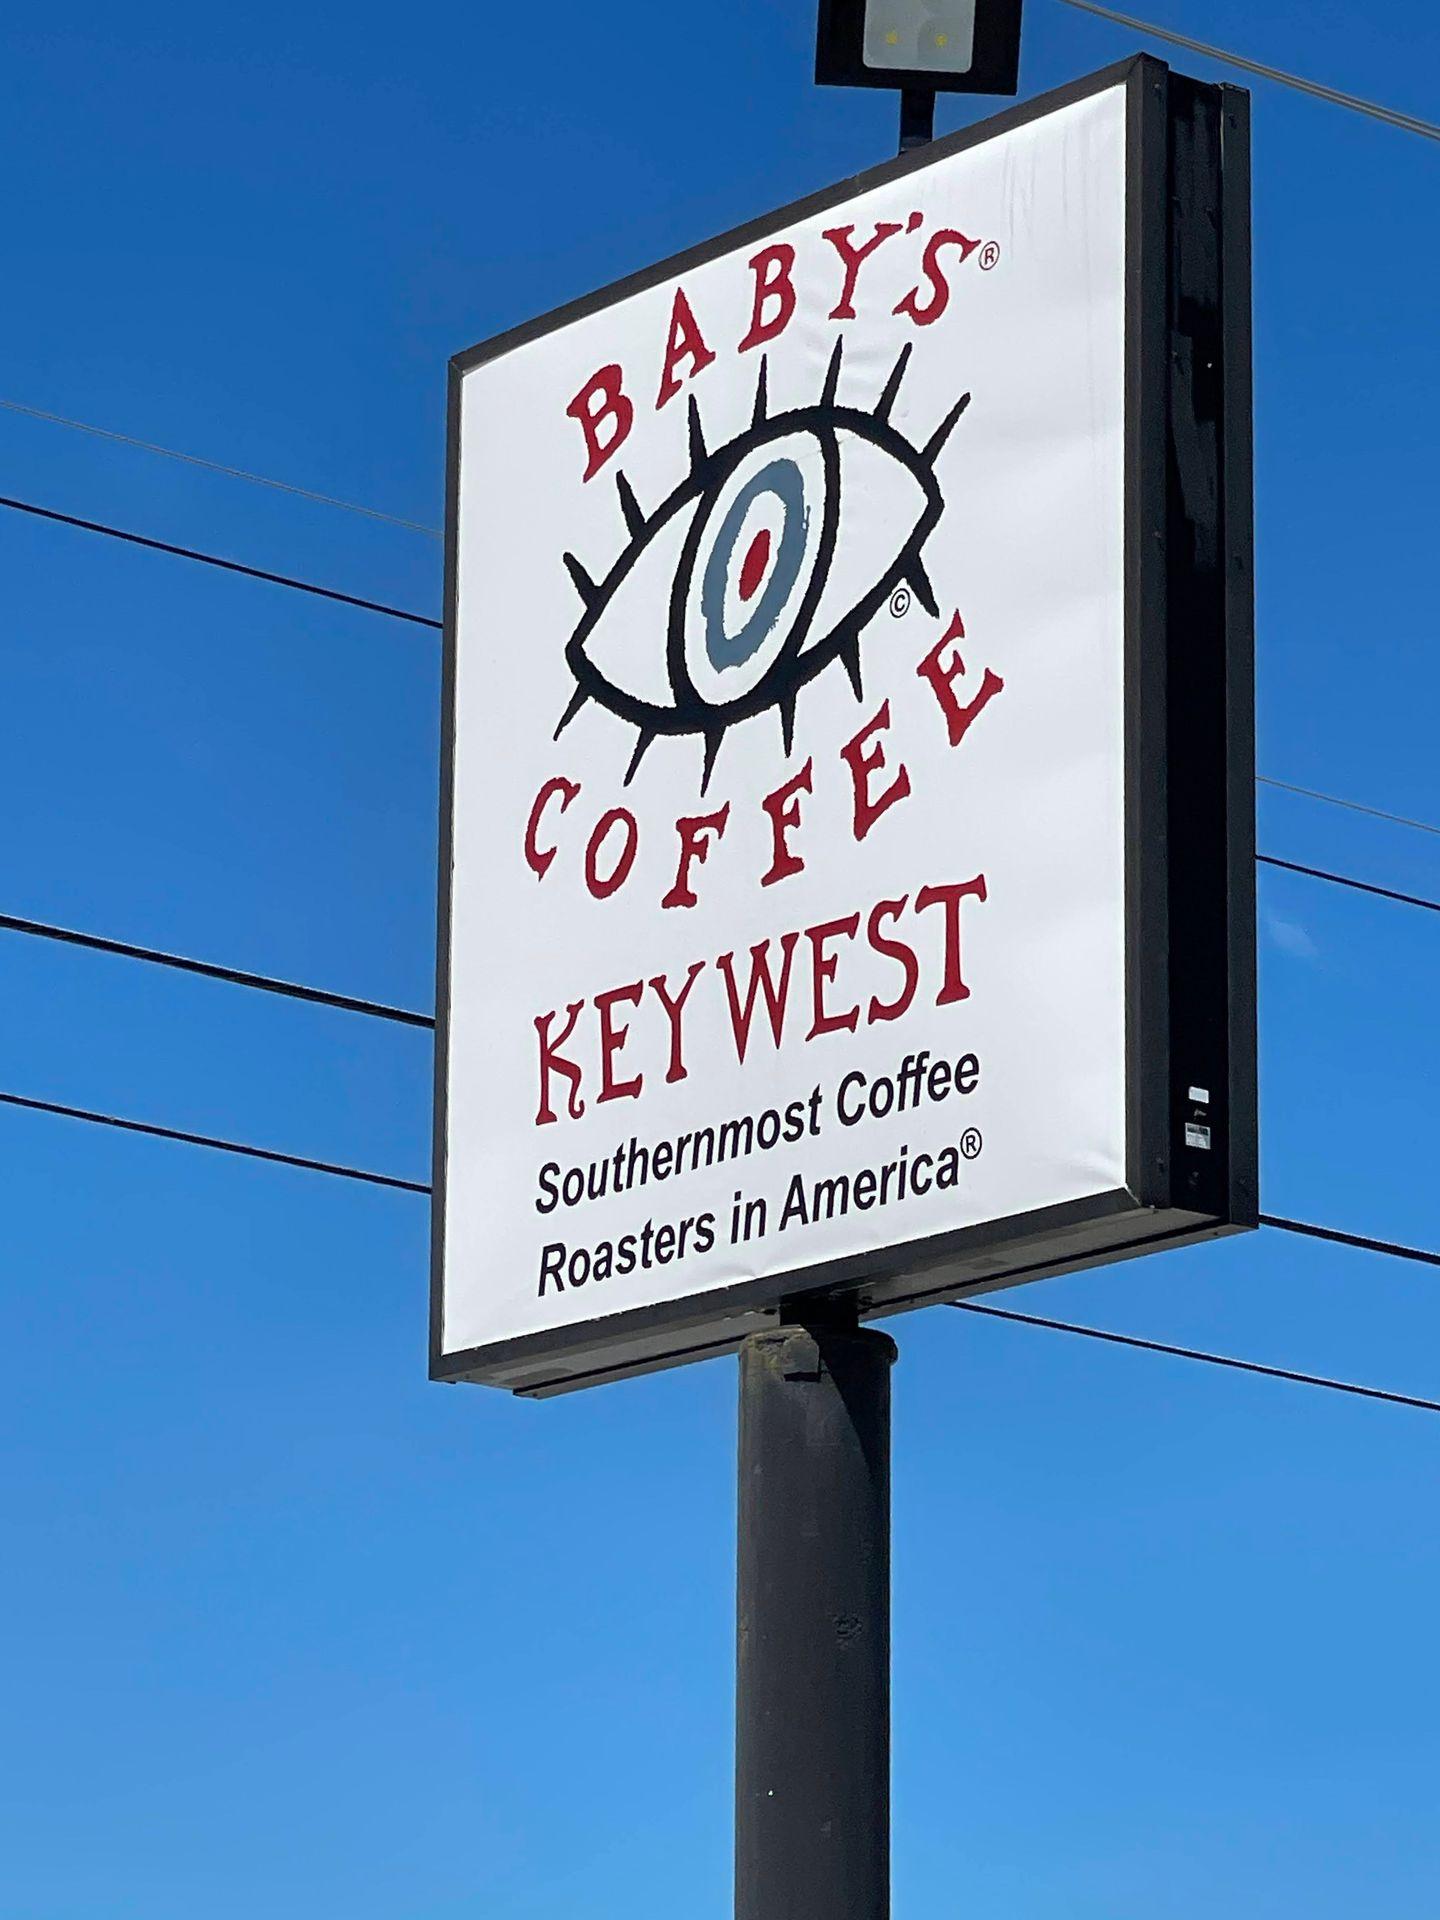 A Baby's Coffee sign outdoors with the tagline 'Southernmost Coffee Roasters in America'